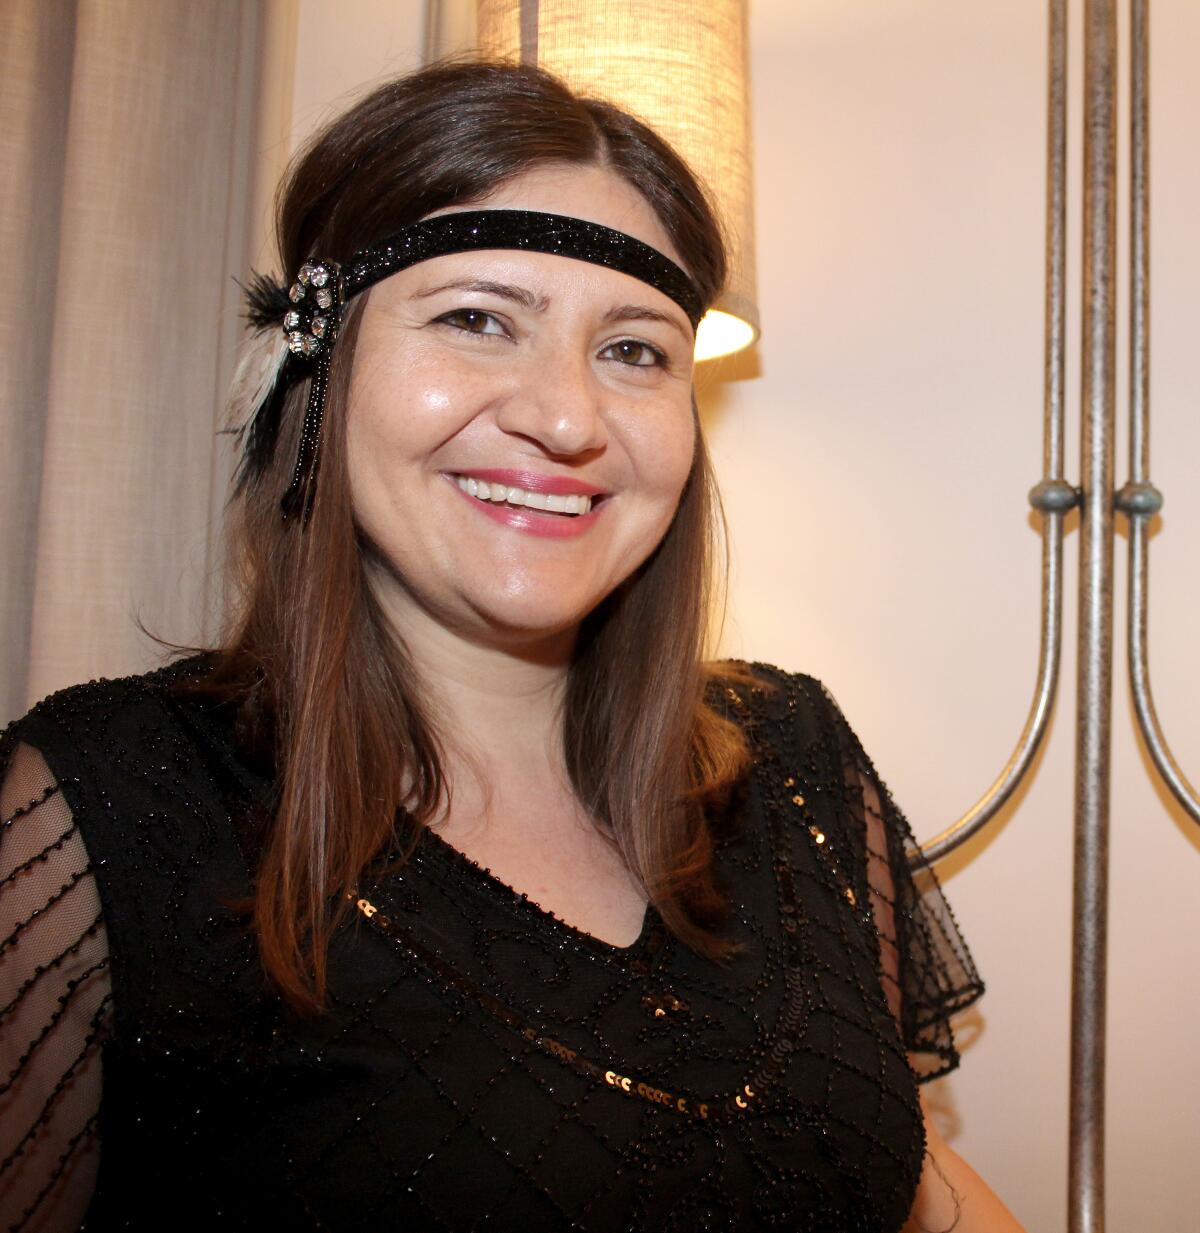 Diamonds and Pearls honoree Marineh Tchakerian is a ServiceTitan manager and Armenian wedding planner extraordinaire.